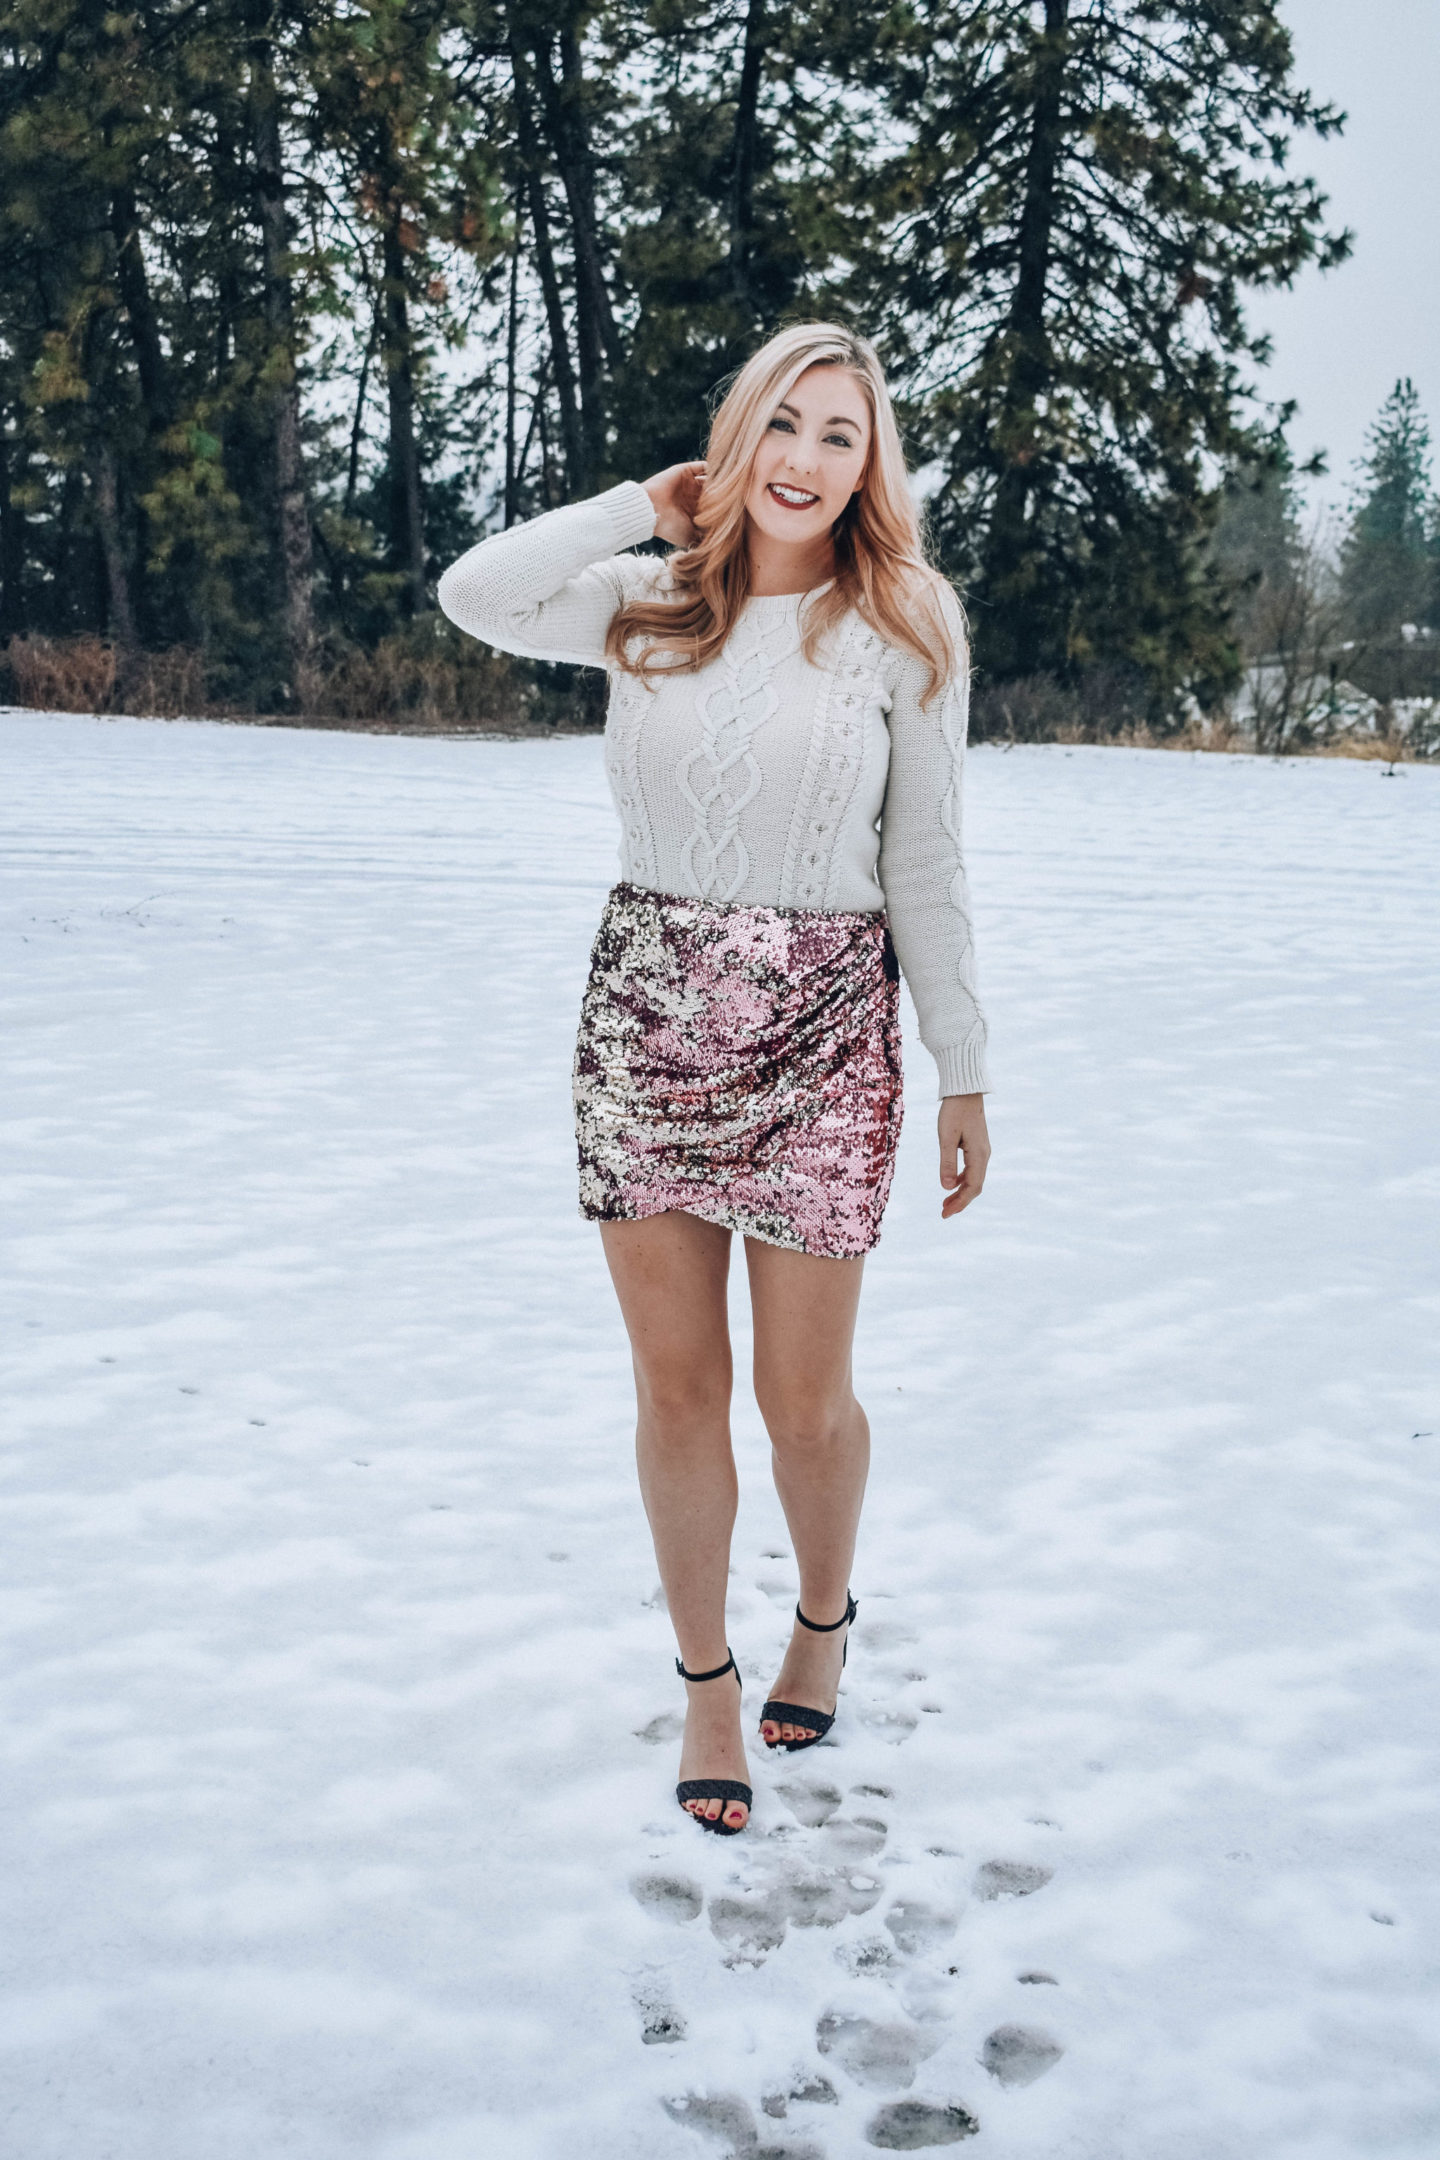 Sequin Skirt and Sweater Outfit!